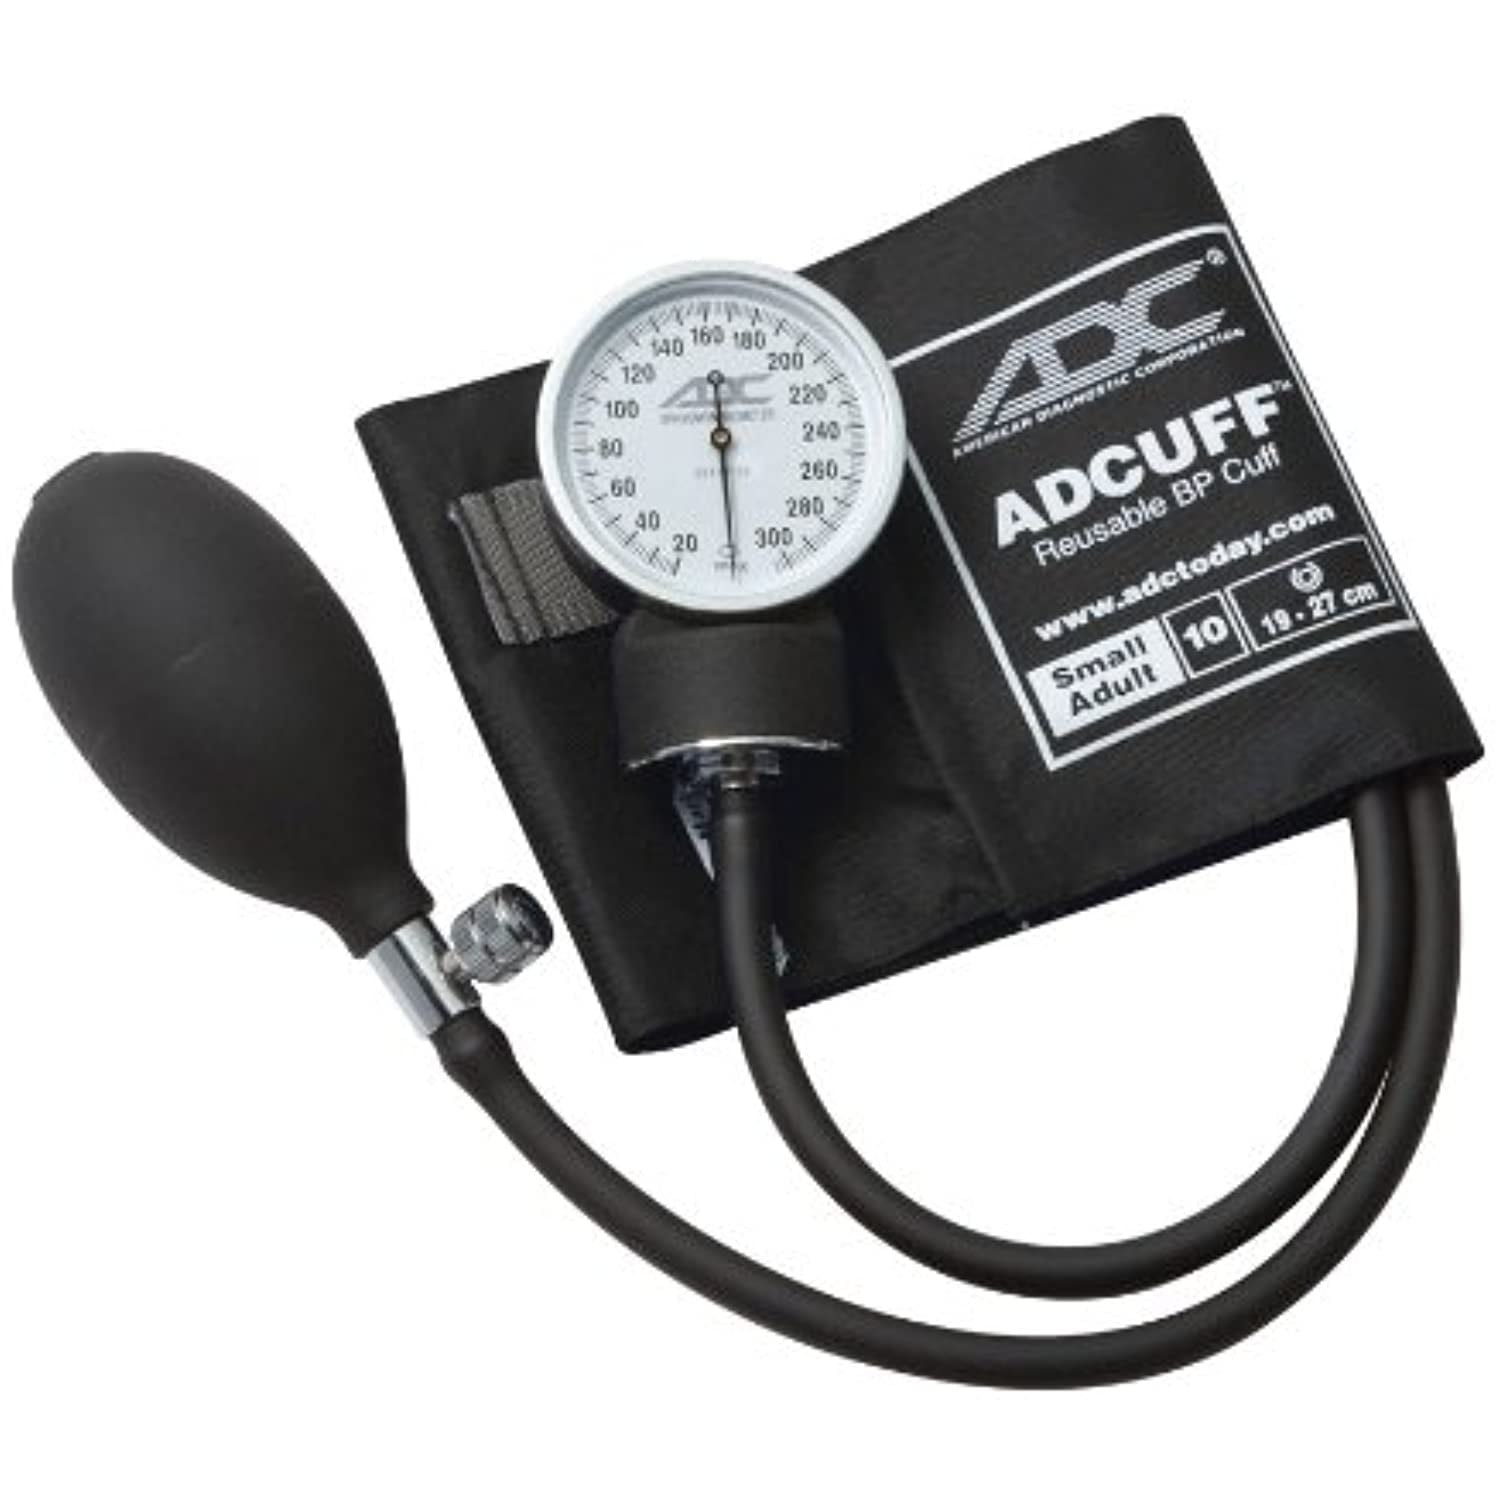 ADC Prosphyg 760 Pocket Aneroid Sphygmomanometer, Adult Cuff in Navy 